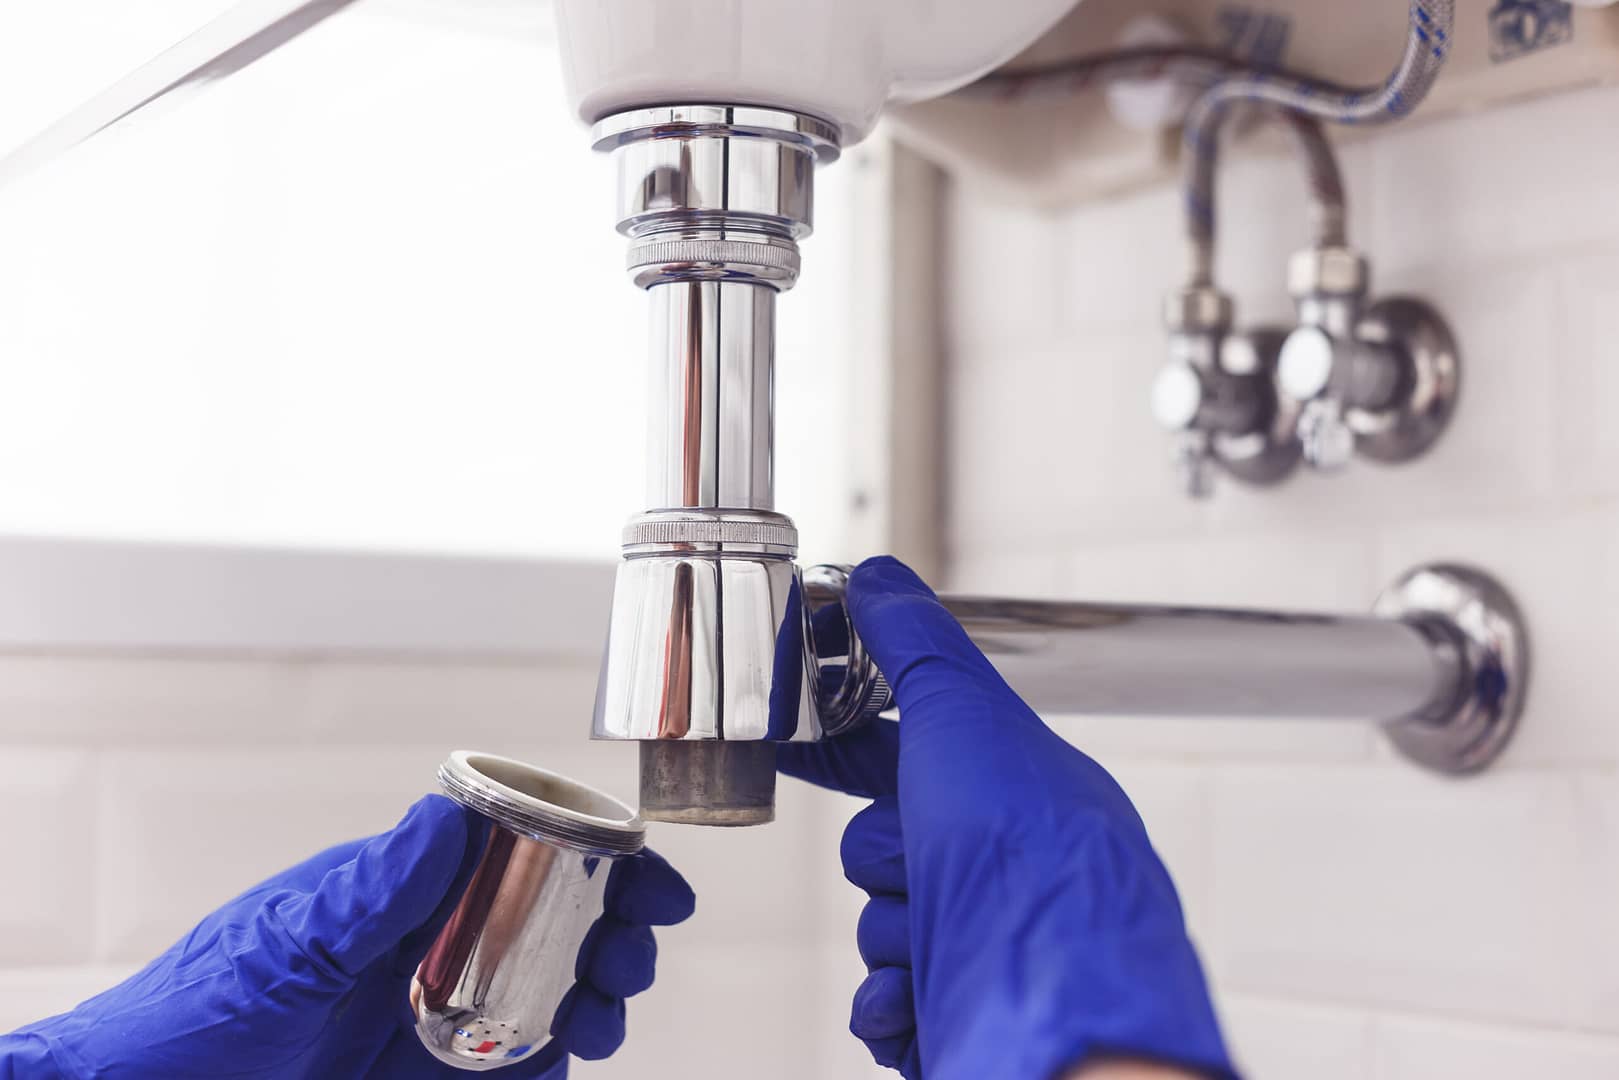 A testament to the intricate details of plumbing work, showcasing the skills that set expert plumbers apart. Partner with Local Splash and turn these skills into a unique selling point, driving business growth.